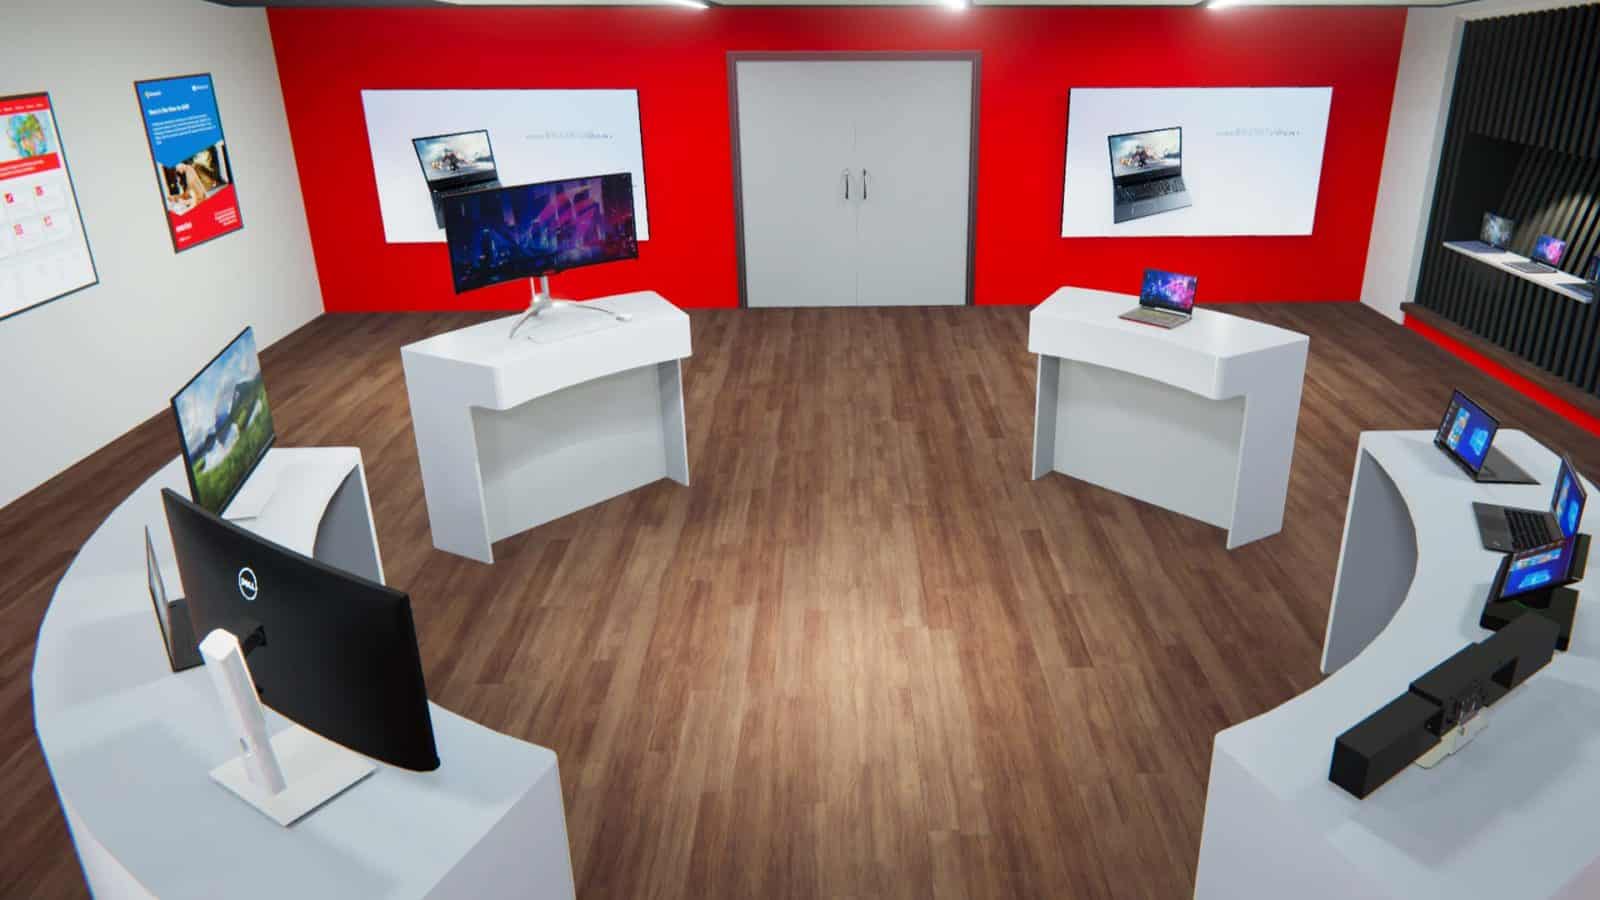 Virtual showroom with various 3D modelled computers and laptops.